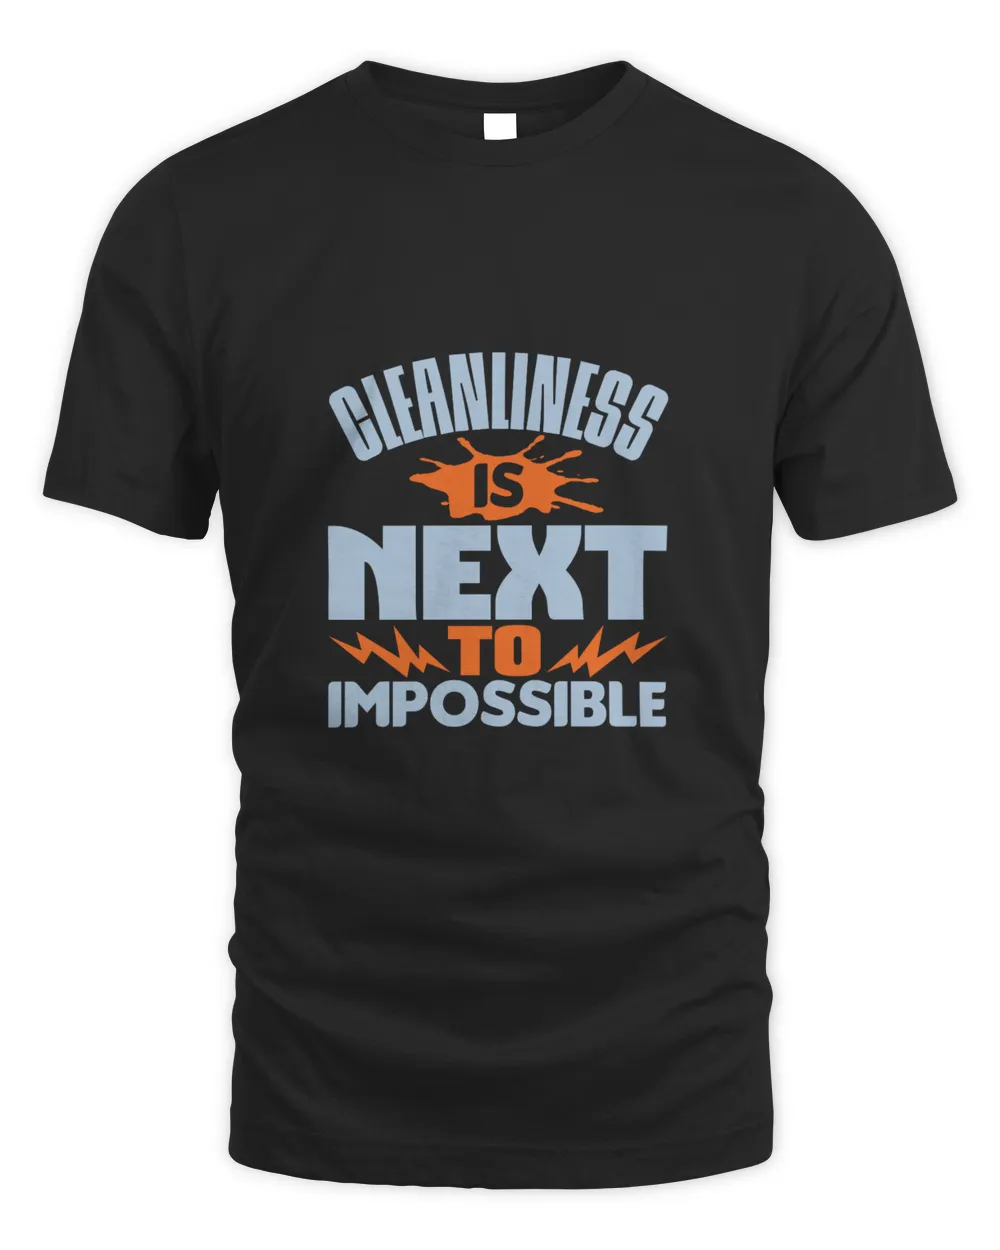 Cleanliness Is Next To Impossiblee, Cleaner Shirt, Cleaner Gifts, Cleaner, Cleaner Tshirt, Funny Gift For Cleaner